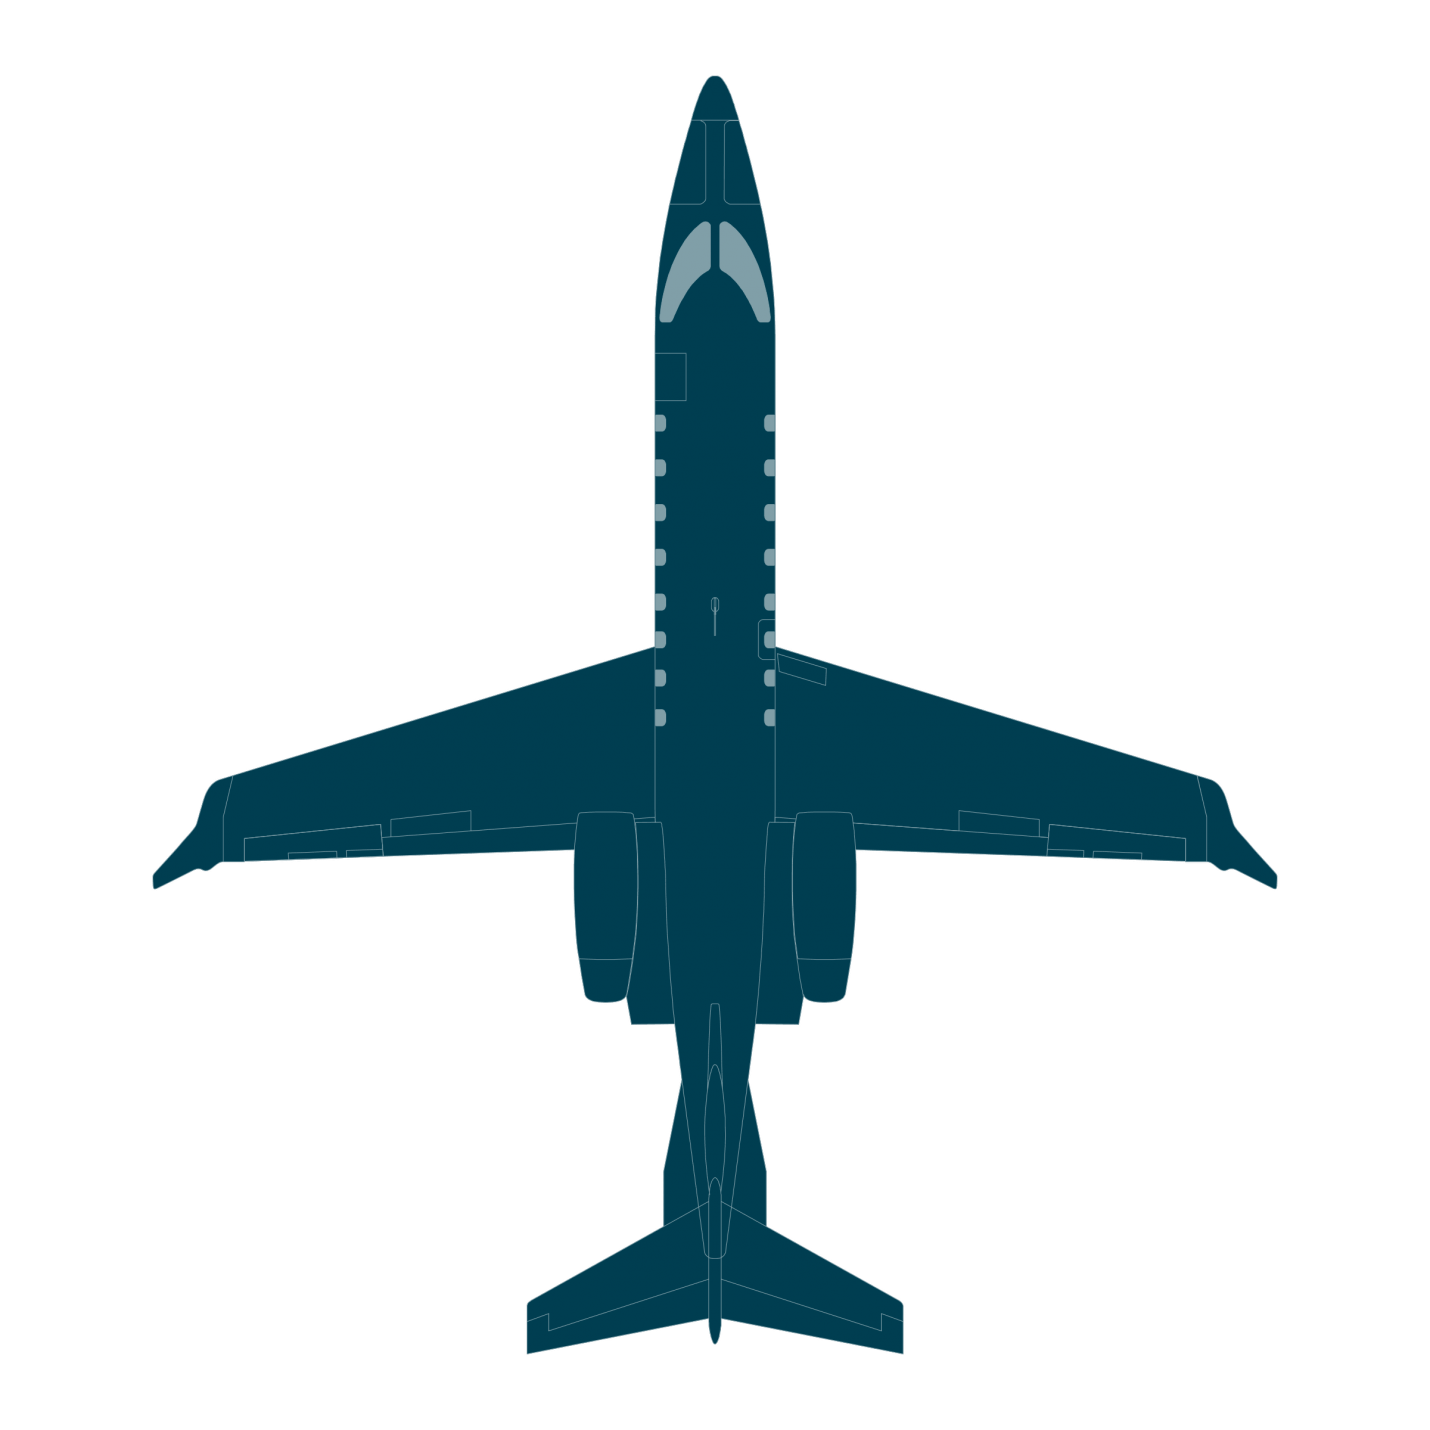 Learjet bombardier business aircraft. Flying clipart mini airplane